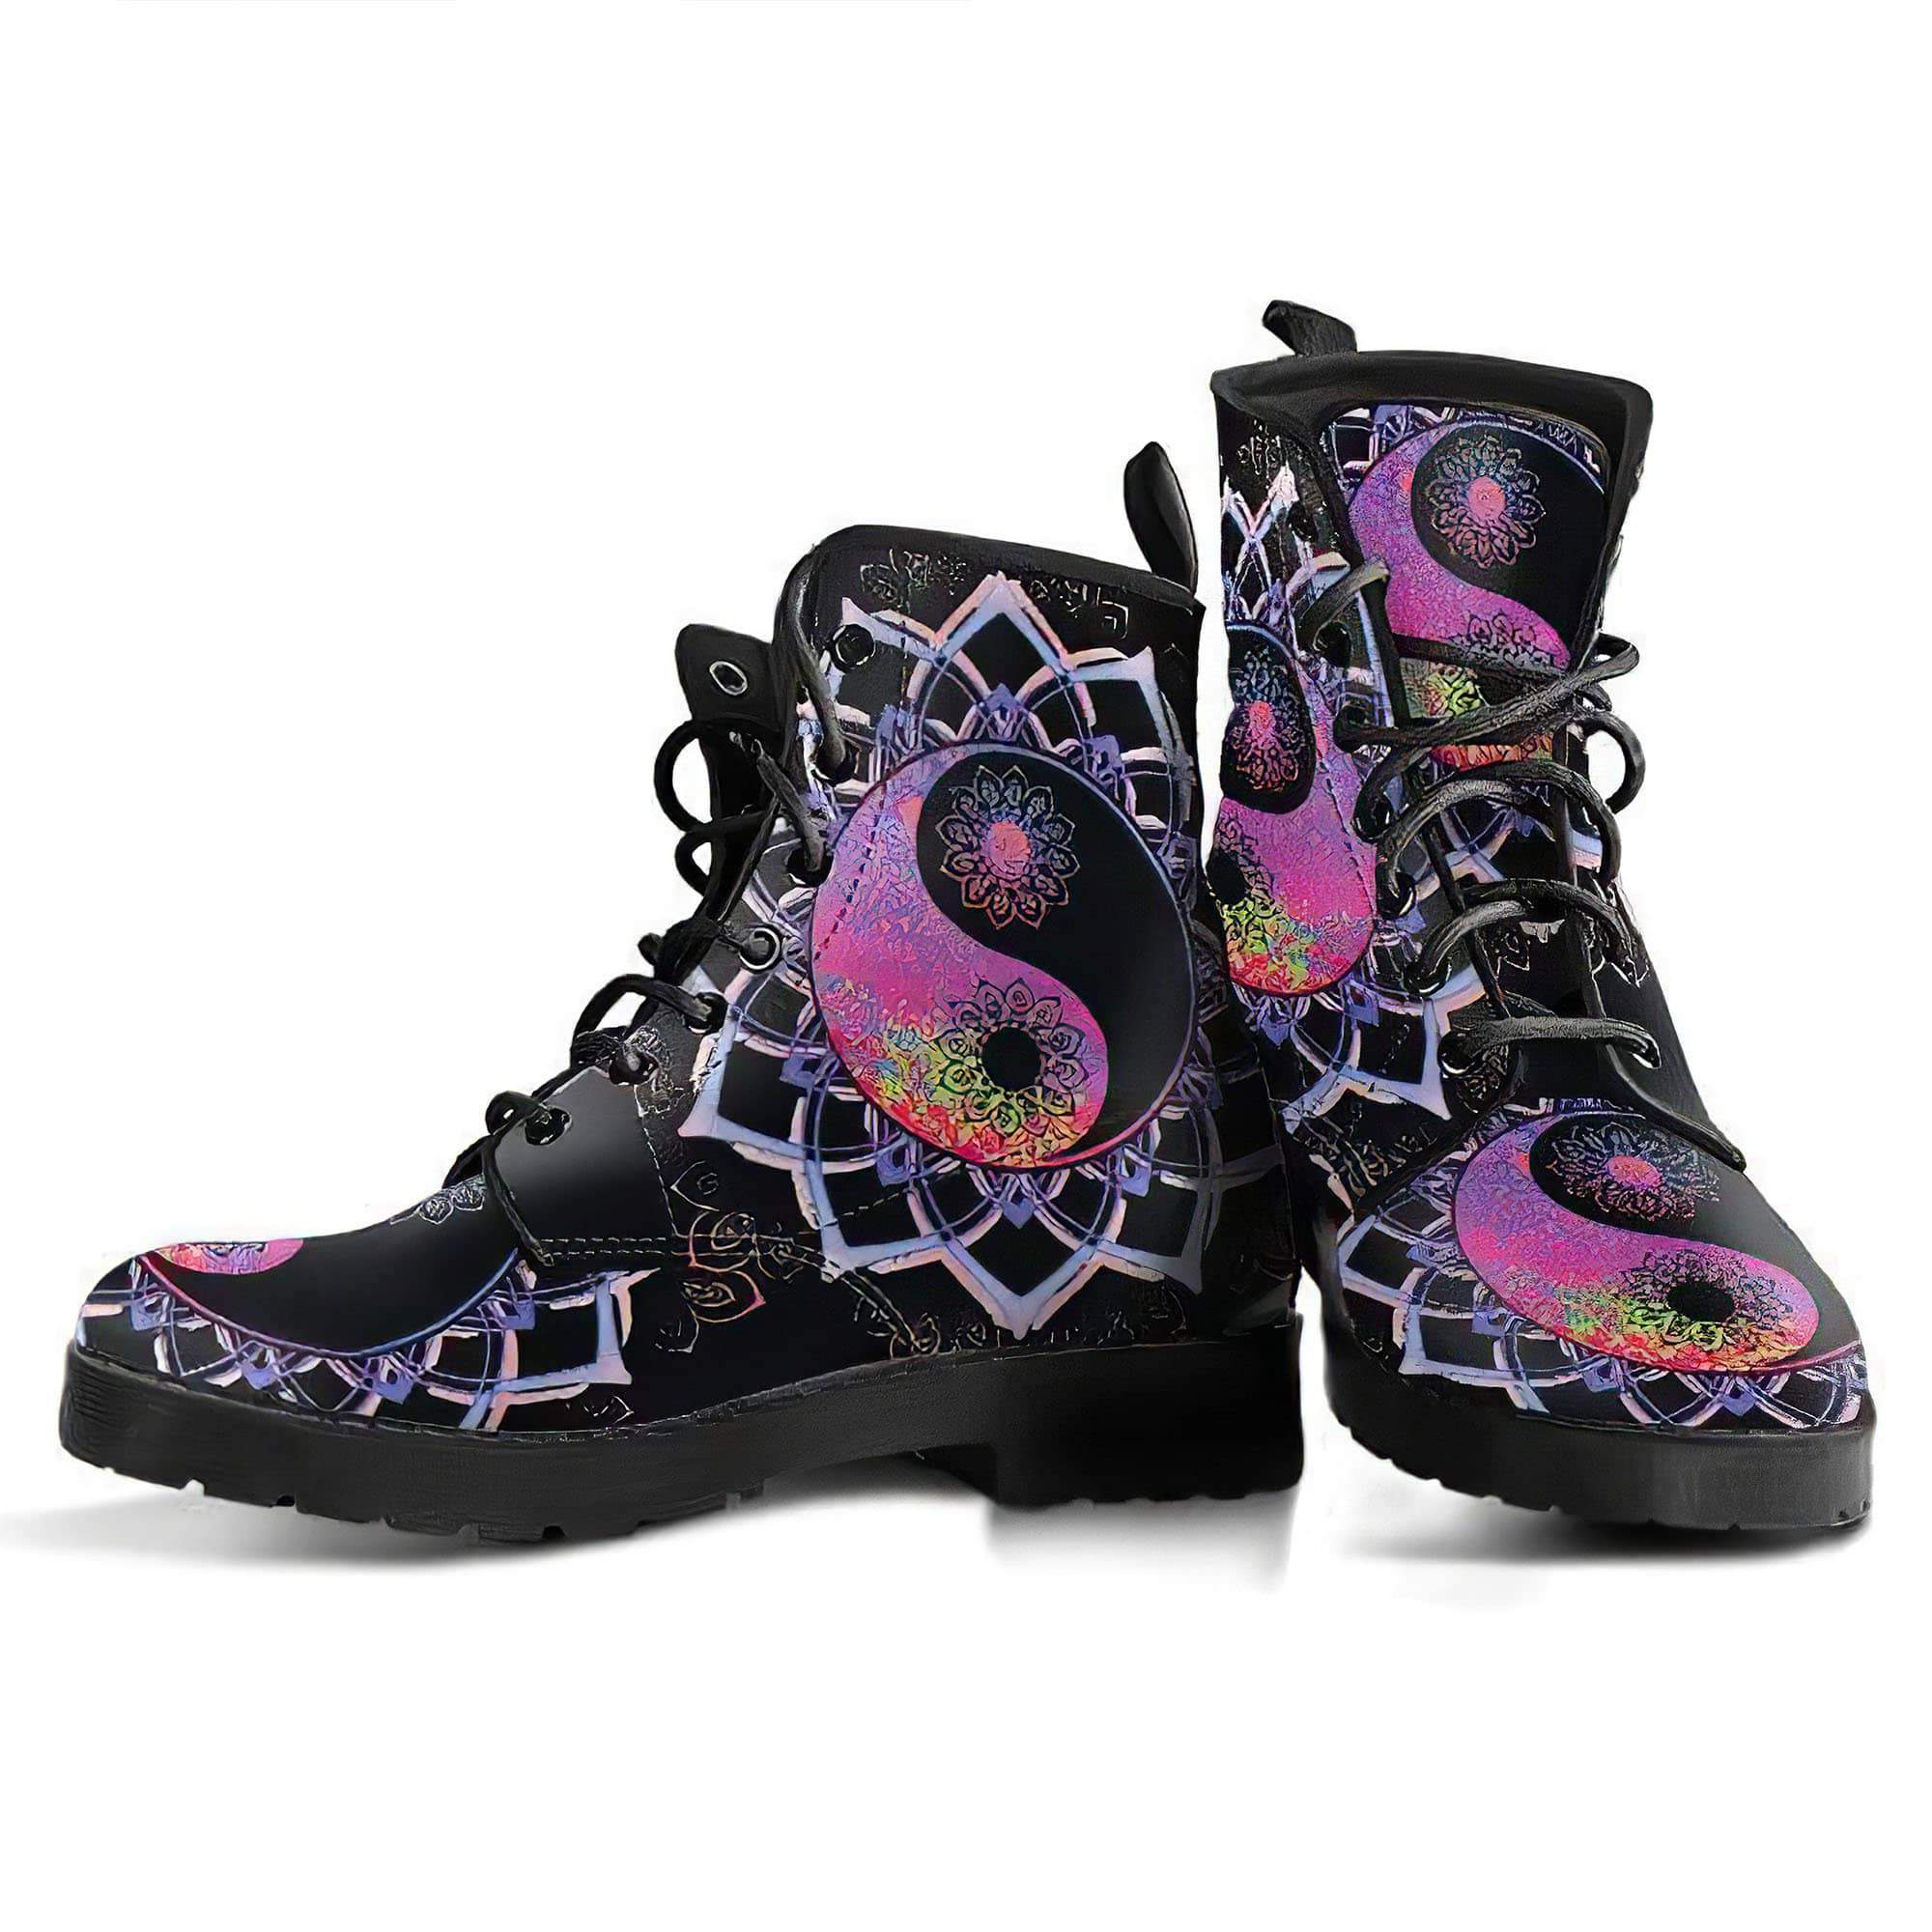 yinyang-mandala-2-handcrafted-boots-women-s-leather-boots-12051982254141.jpg